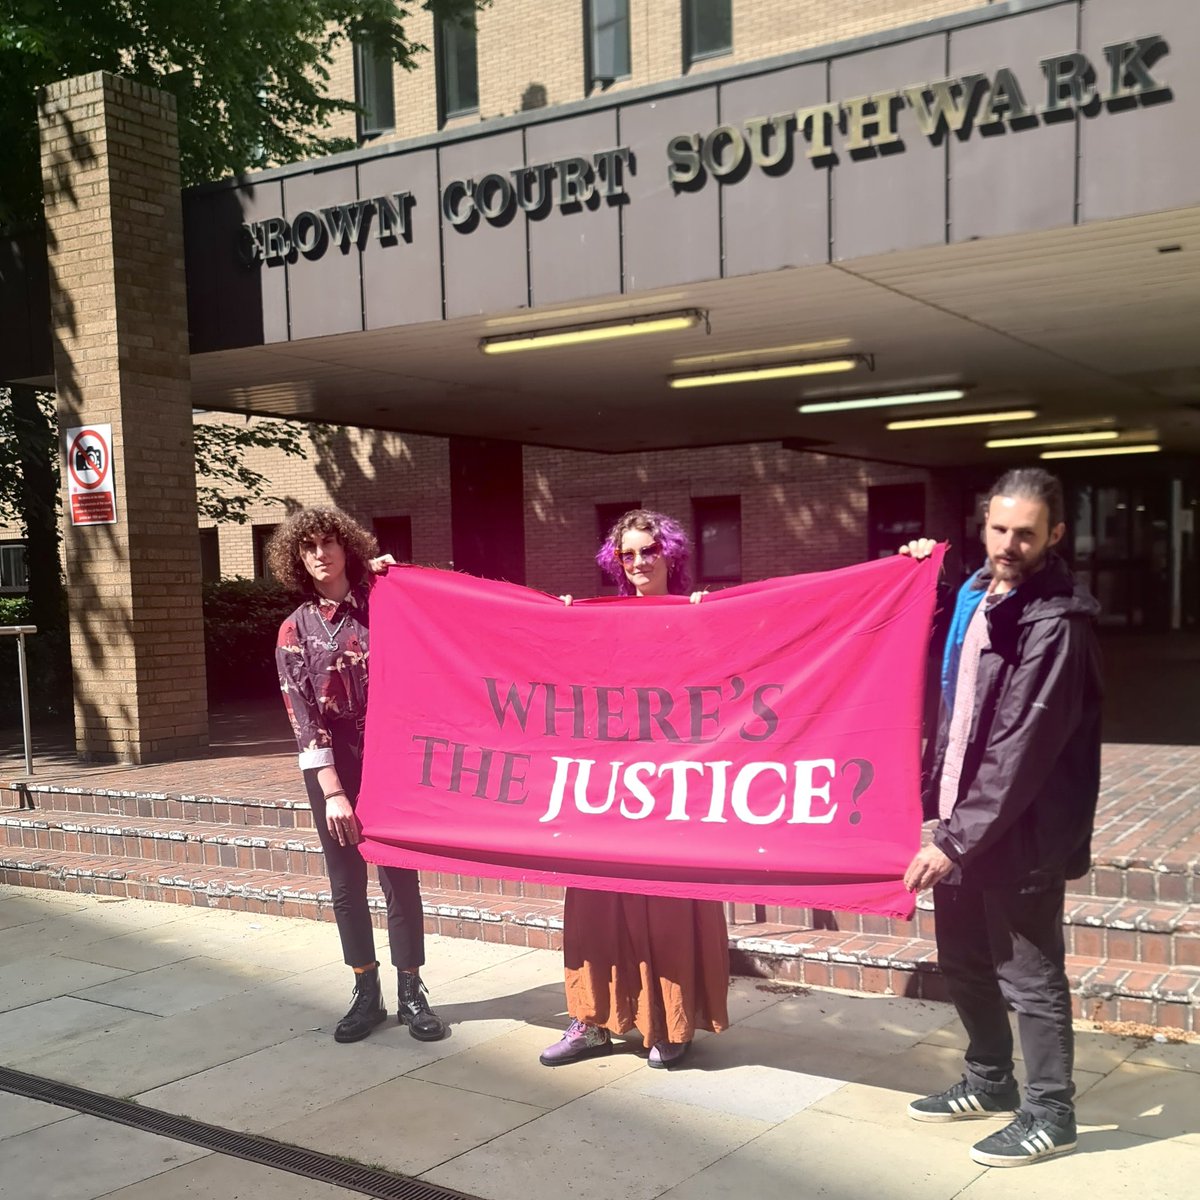 🚨 BREAKING: Phoebe Plummer, Chiara Sarti and Daniel Hall Guilty of Breaching Section 7 ⚖️ The jury found all 3 defendants guilty in the first ever trial for this offence under the Public Order Act 2023. ⛓️ Due to be sentenced at the beginning of July, they face up to 12